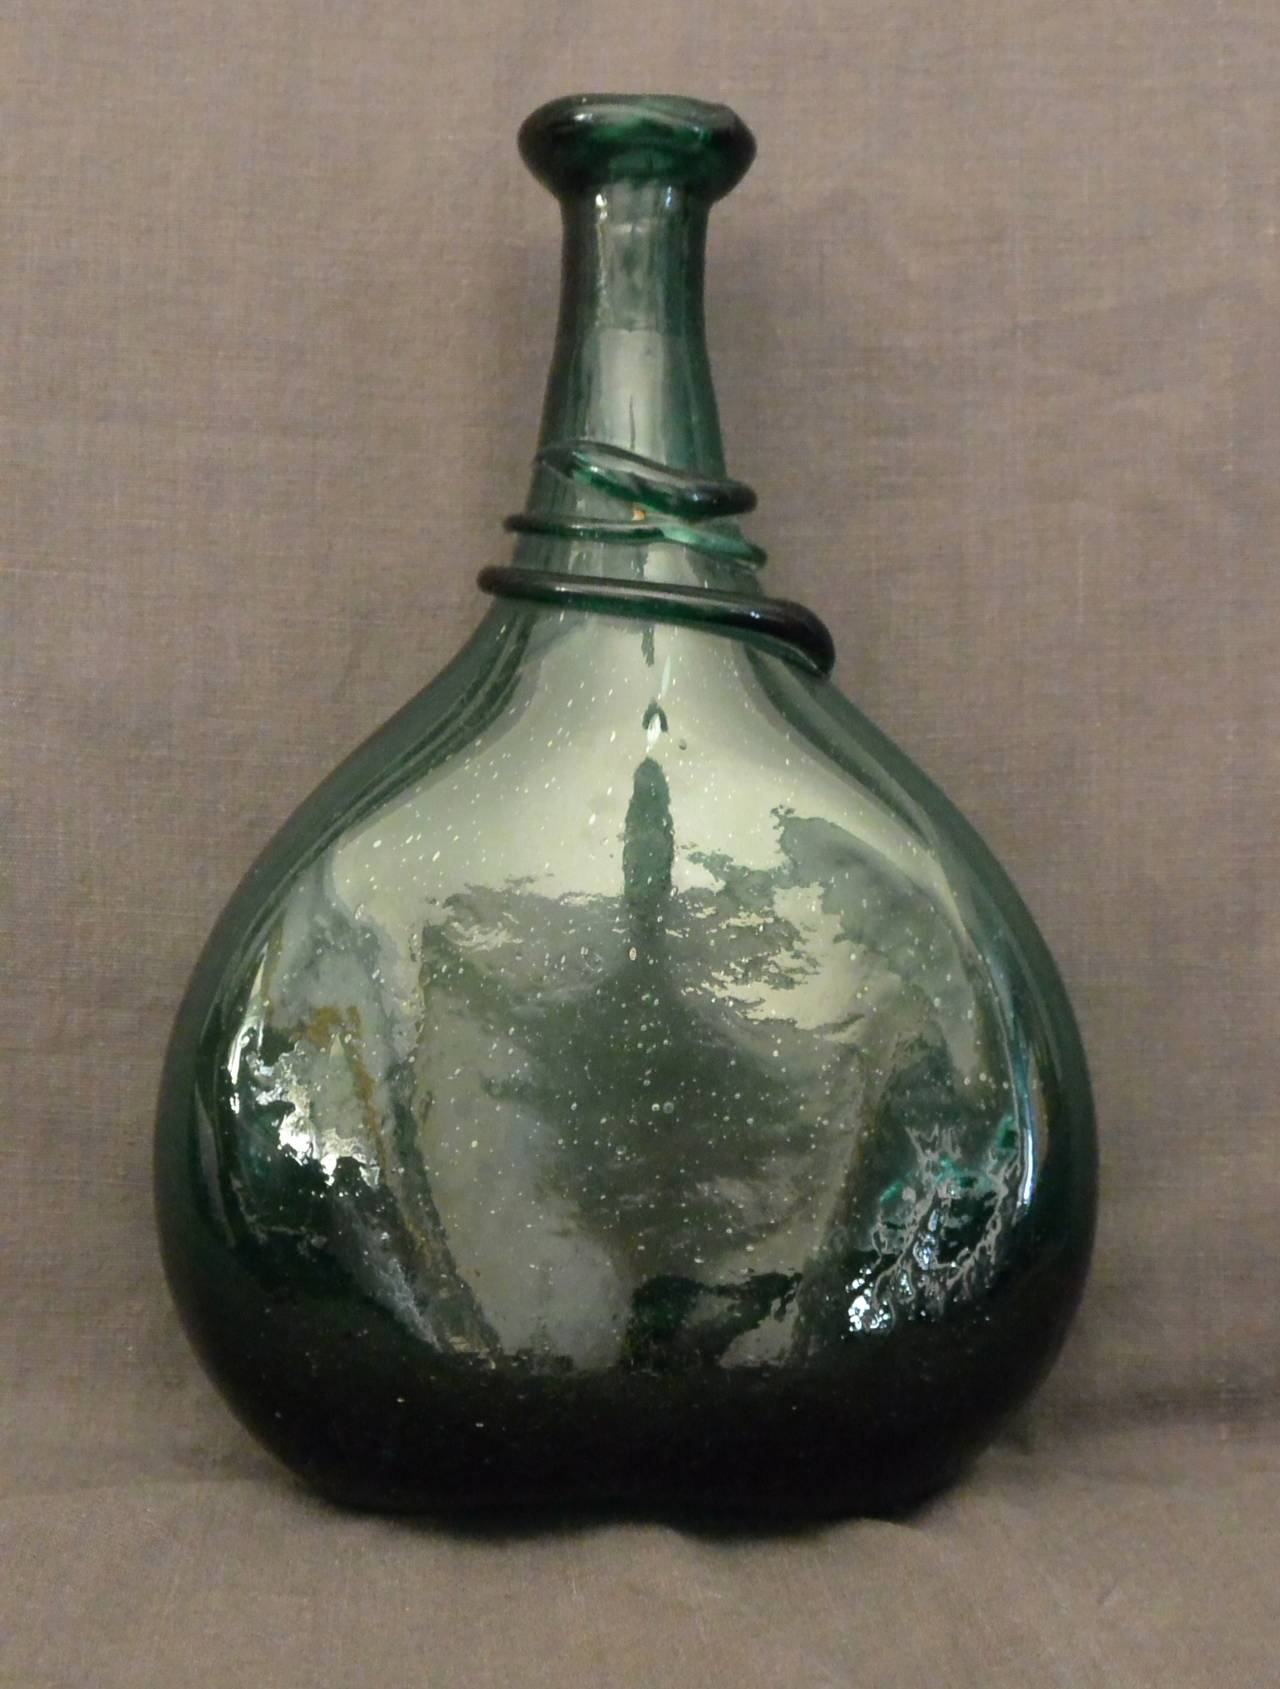 Antique green glass bottle. Flask is slightly molded to conform to horse's side.  Italy, 18th century. 
Dimension: 7.5